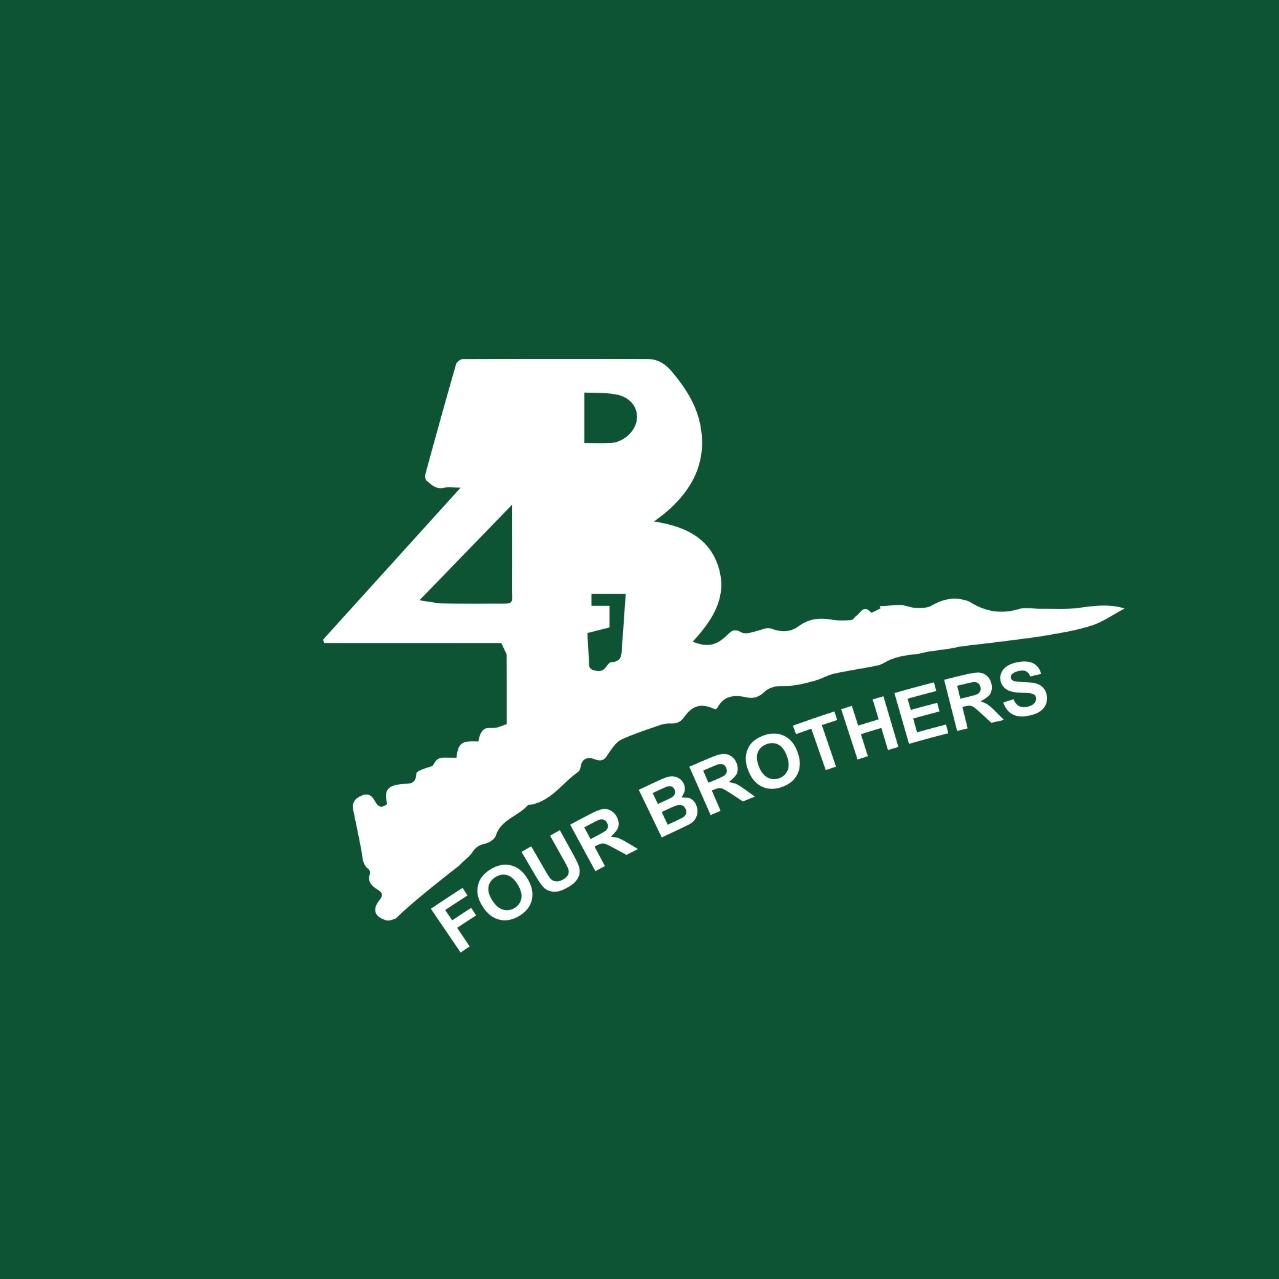 Four brothers